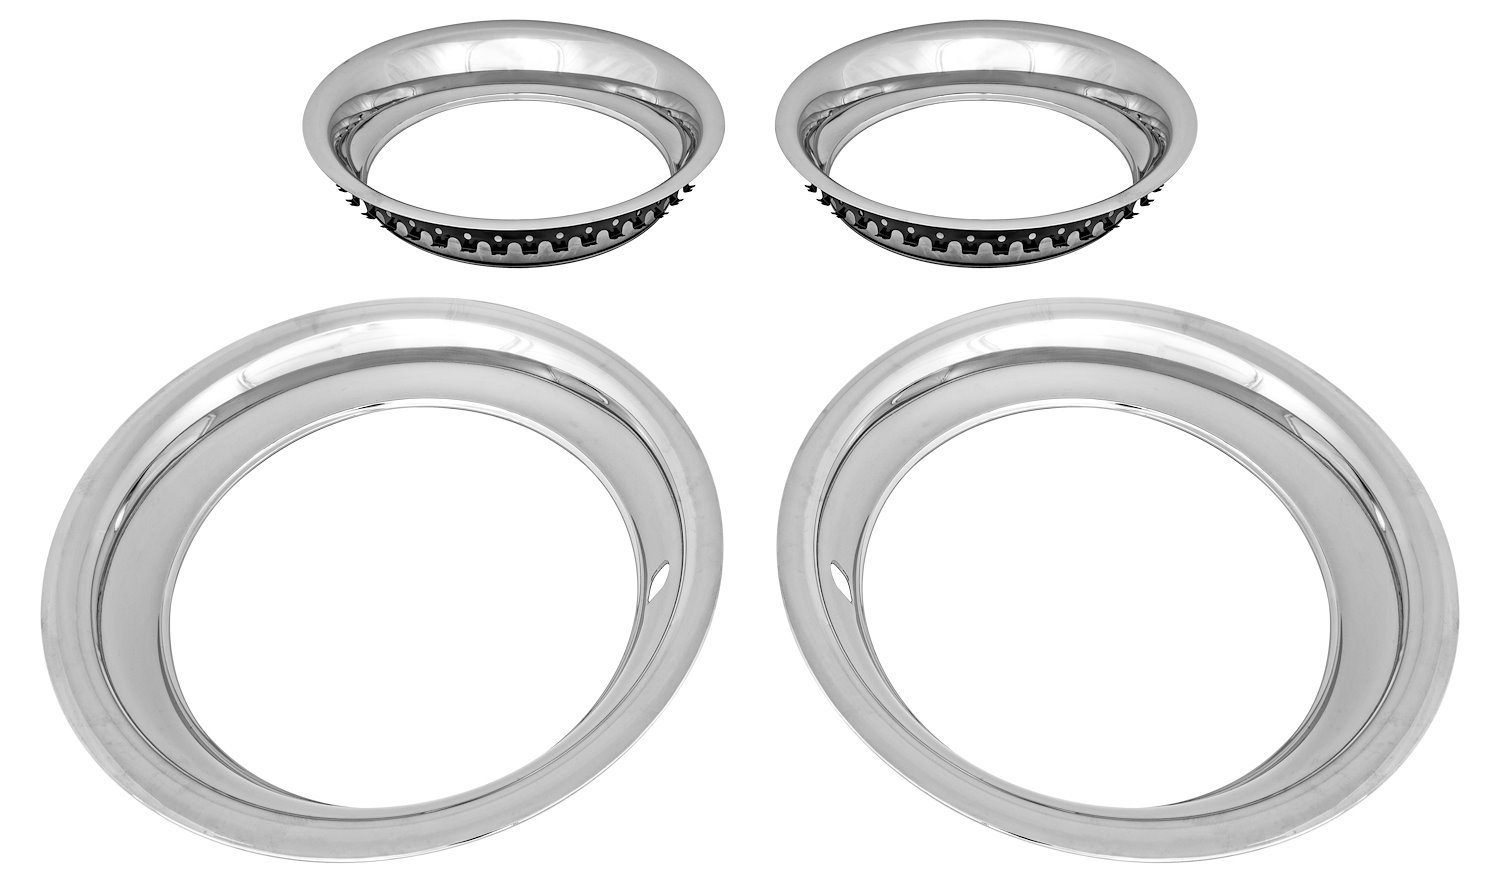 Stainless Steel Trim Ring Set for 15 in. x 6 in. Wheels [1.500 in. D x 1.625 in. W]